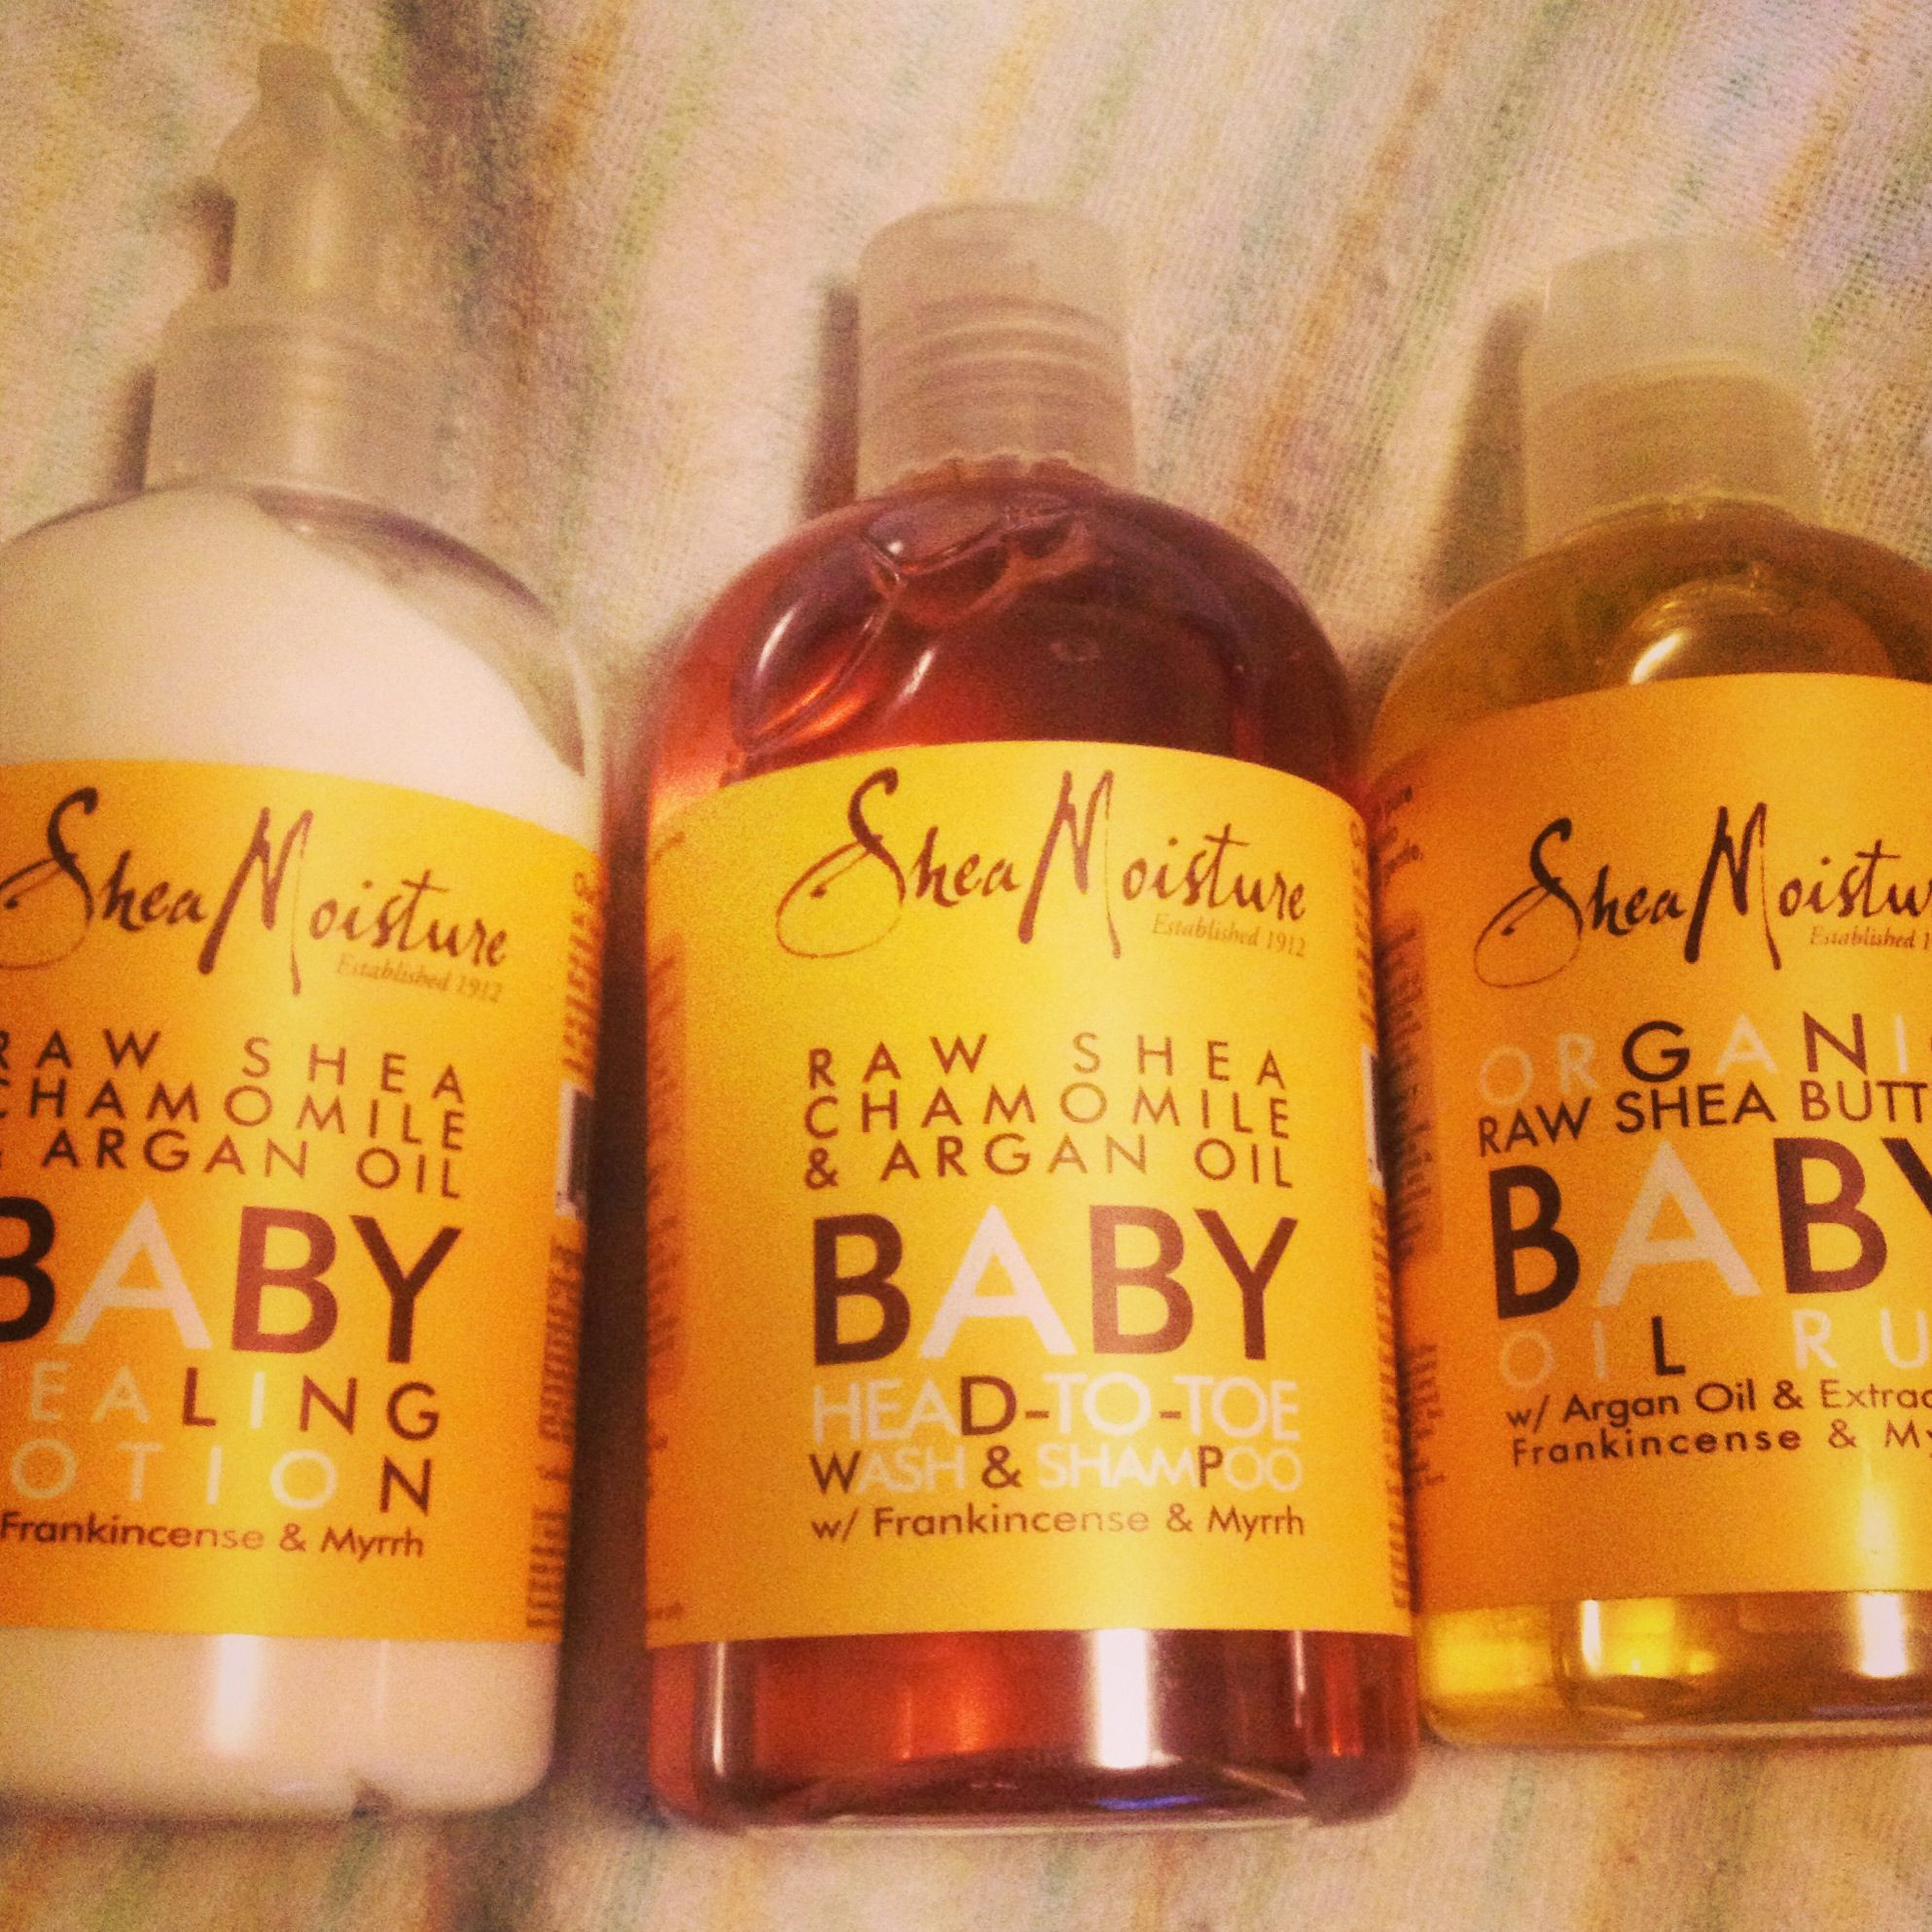 Shea Moisture Baby Hair
 Pin by Holly Nabours on My Favorite Products and Stuff